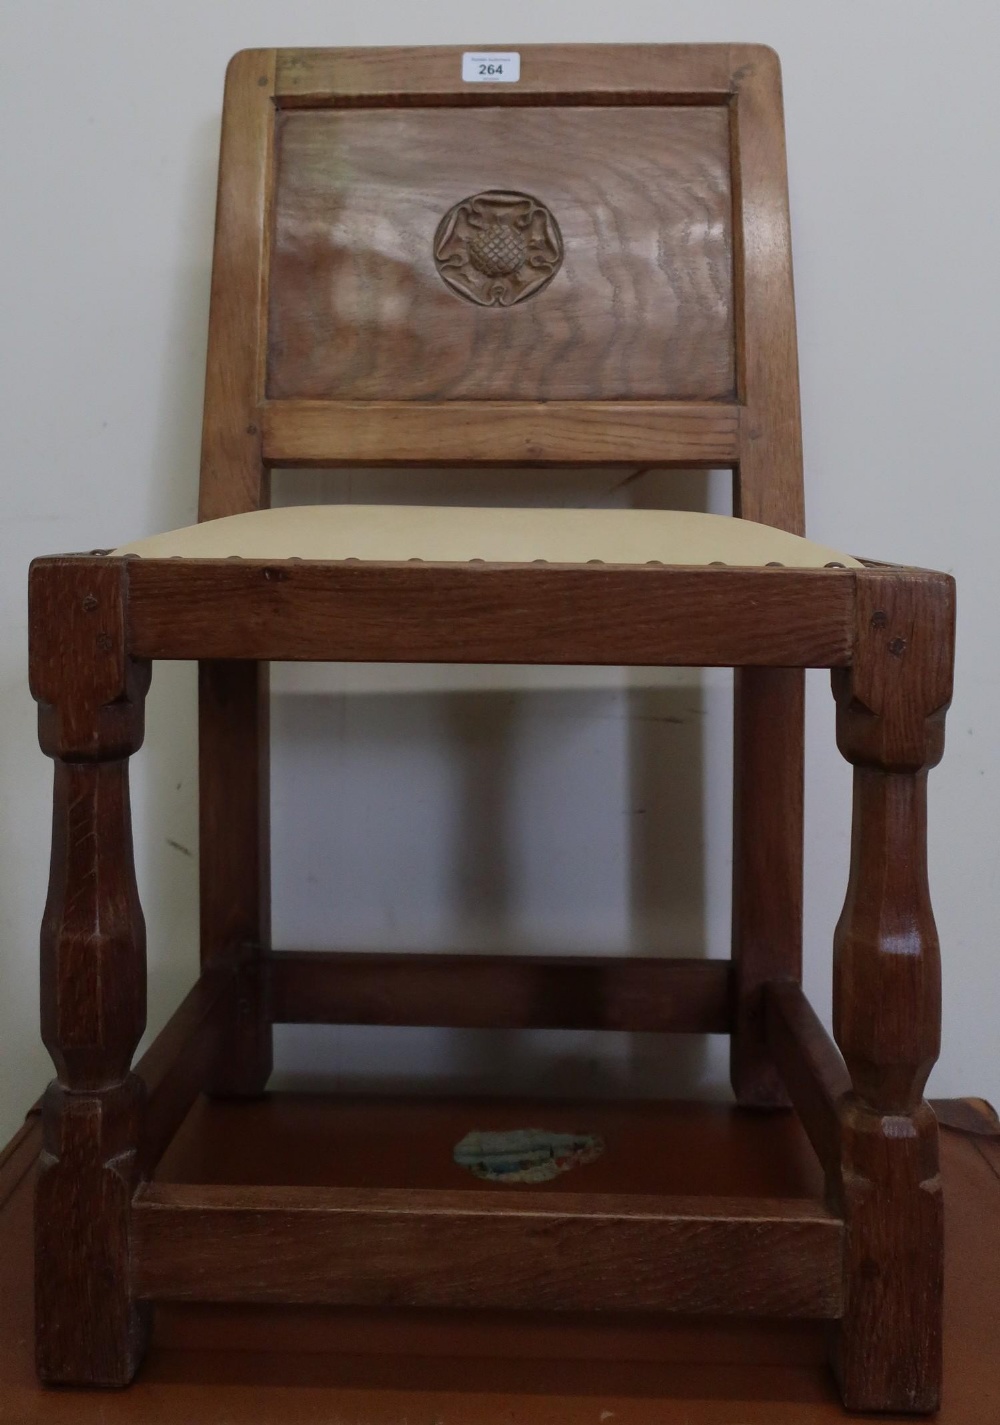 Yorkshire oak childs chair, panel back carved with a Yorkshire rose, brass nail upholstered seat, on